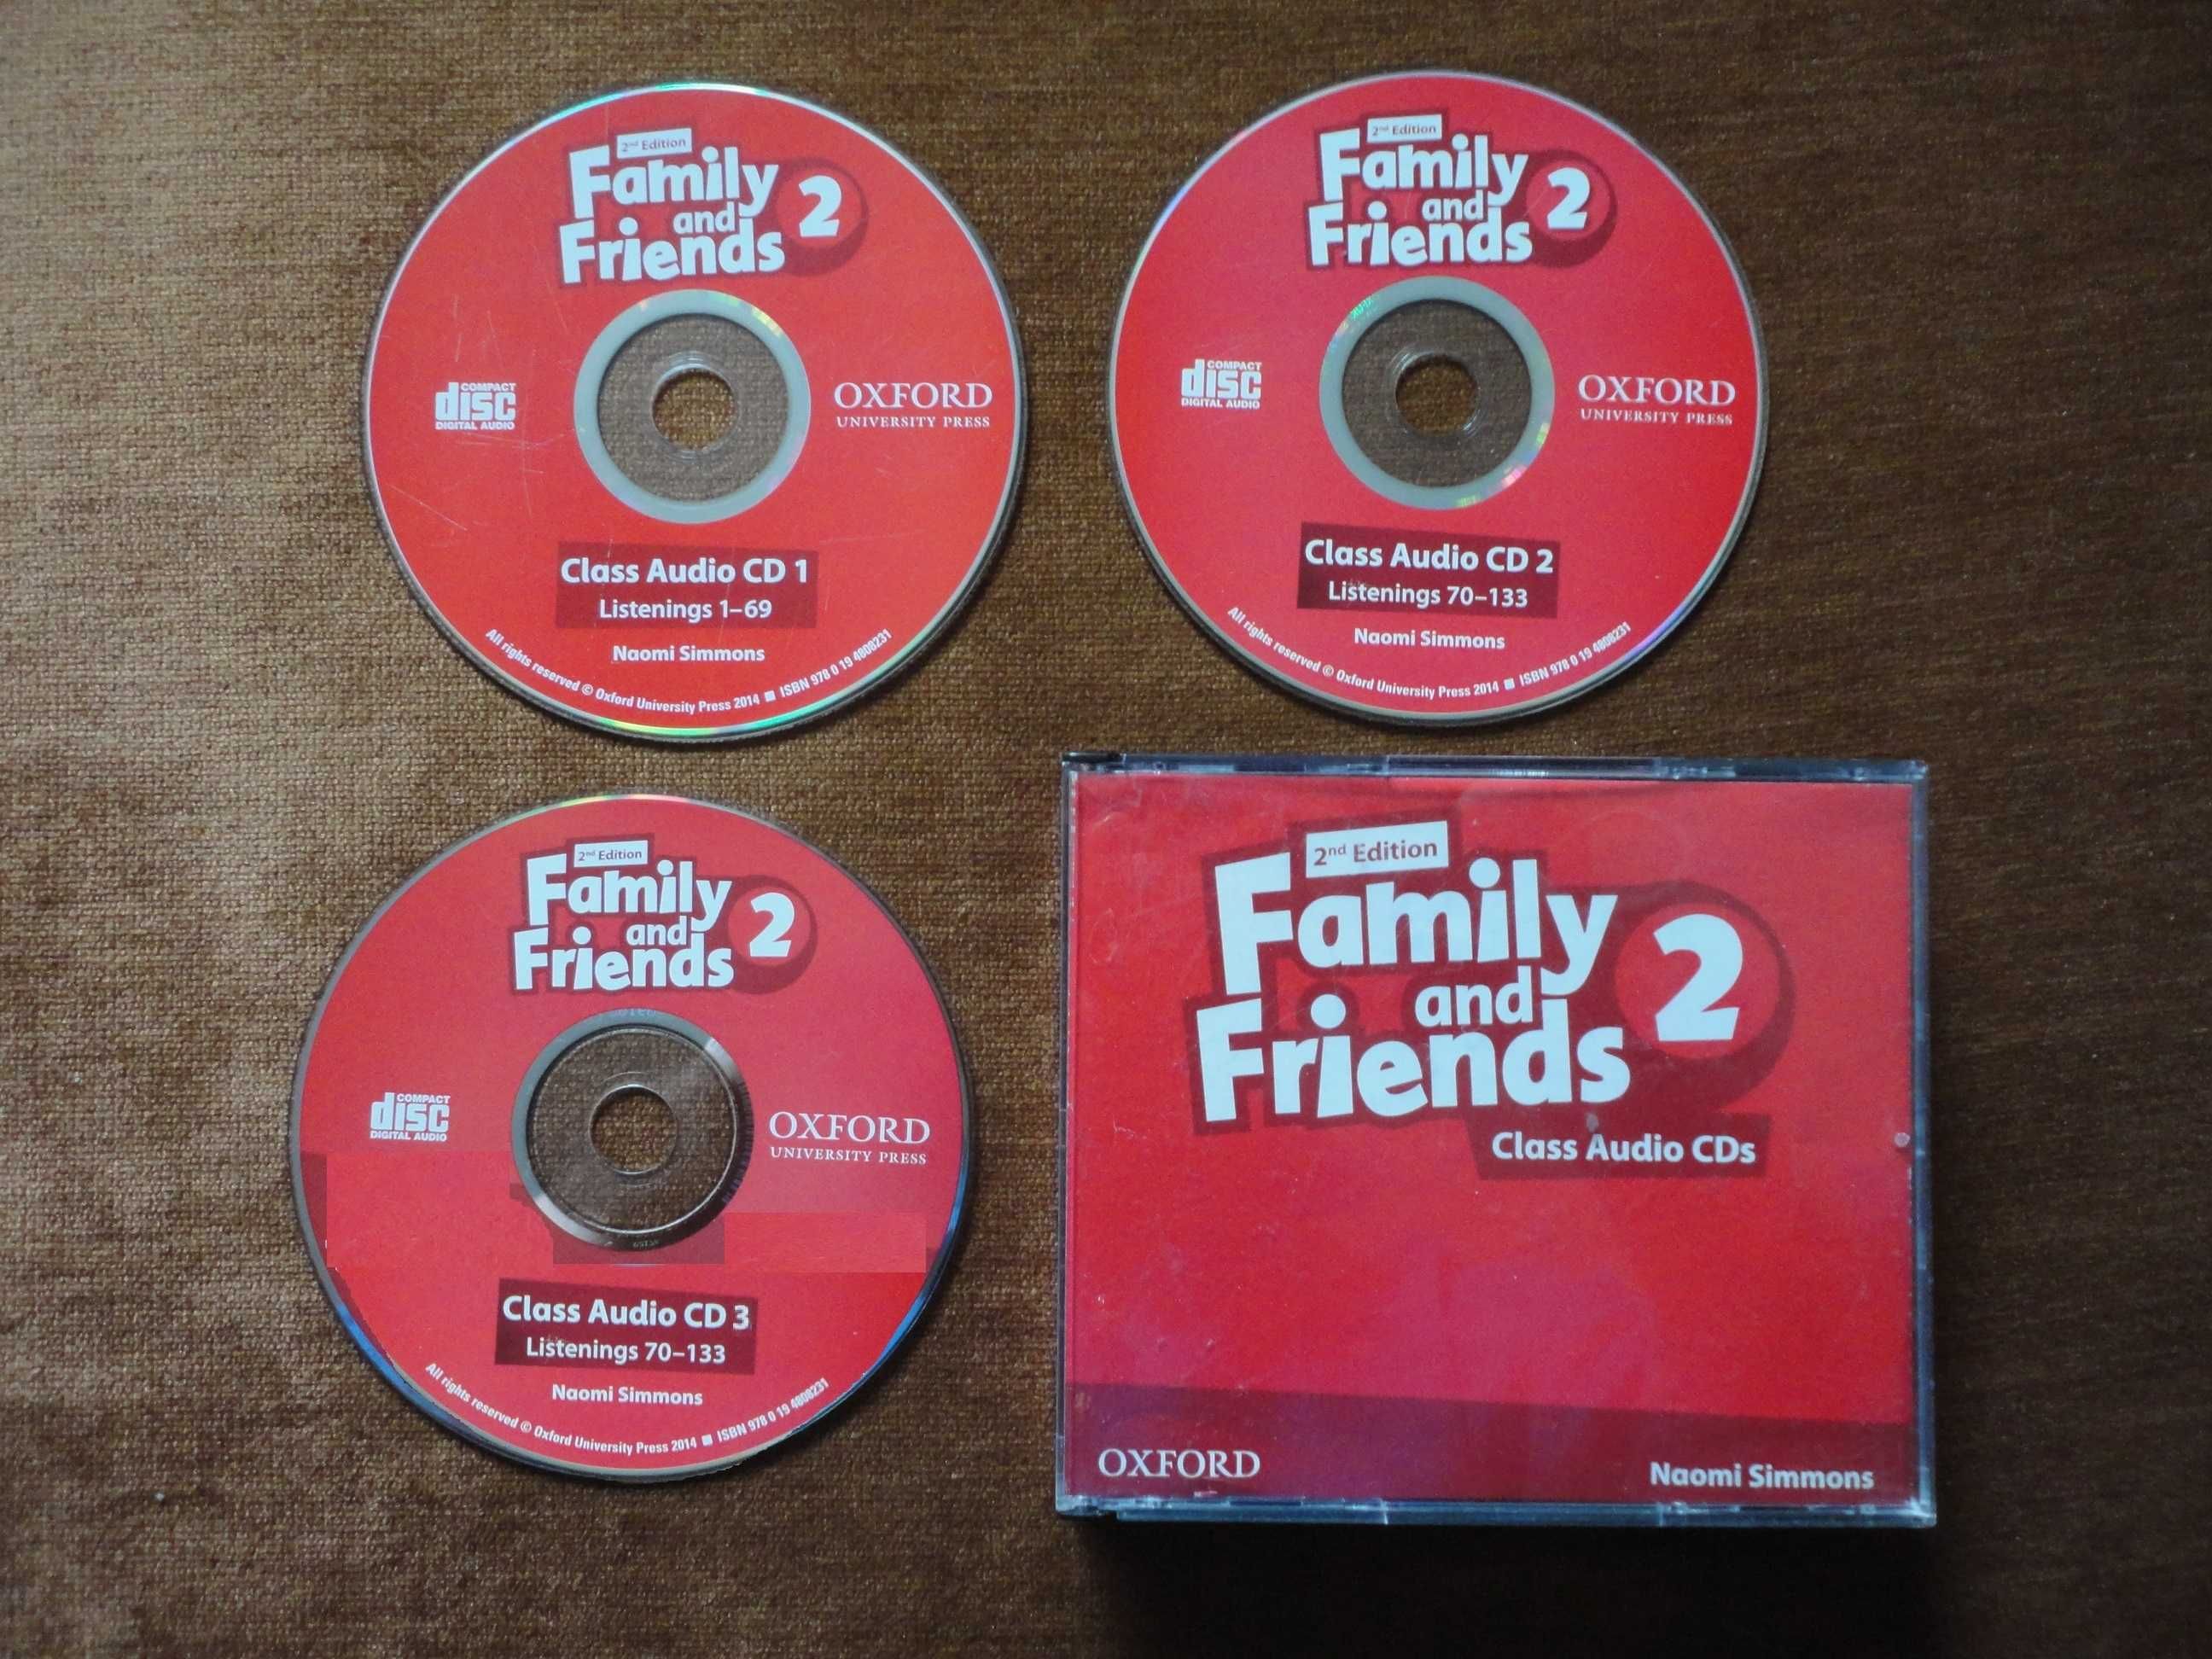 Family and friends 2 Class Audio CDs (2d Edition)